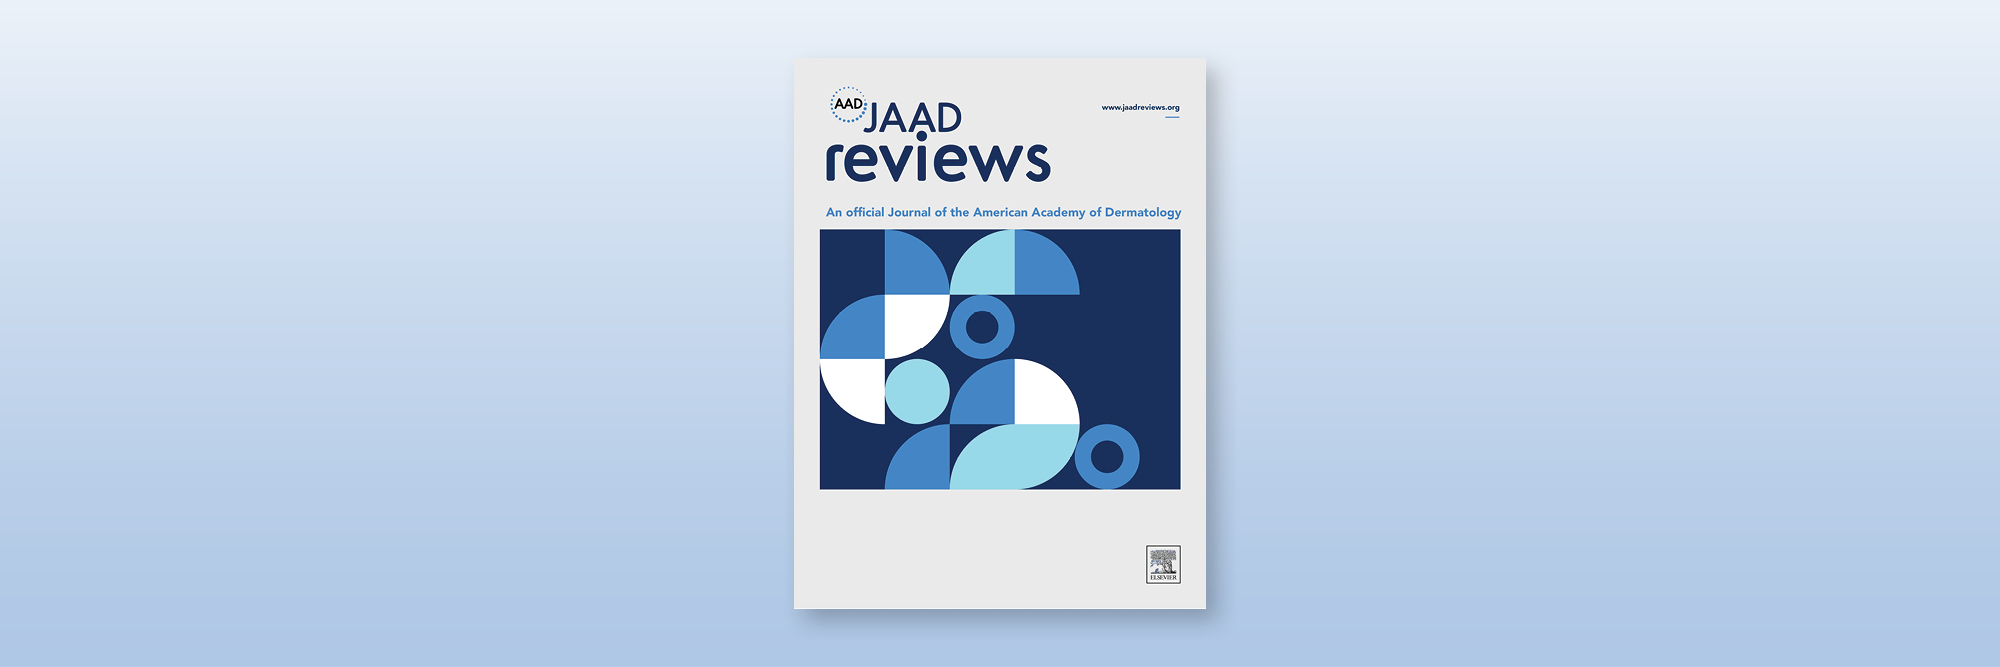 Image for Three’s company: JAAD Reviews joins our two other open access, online journals